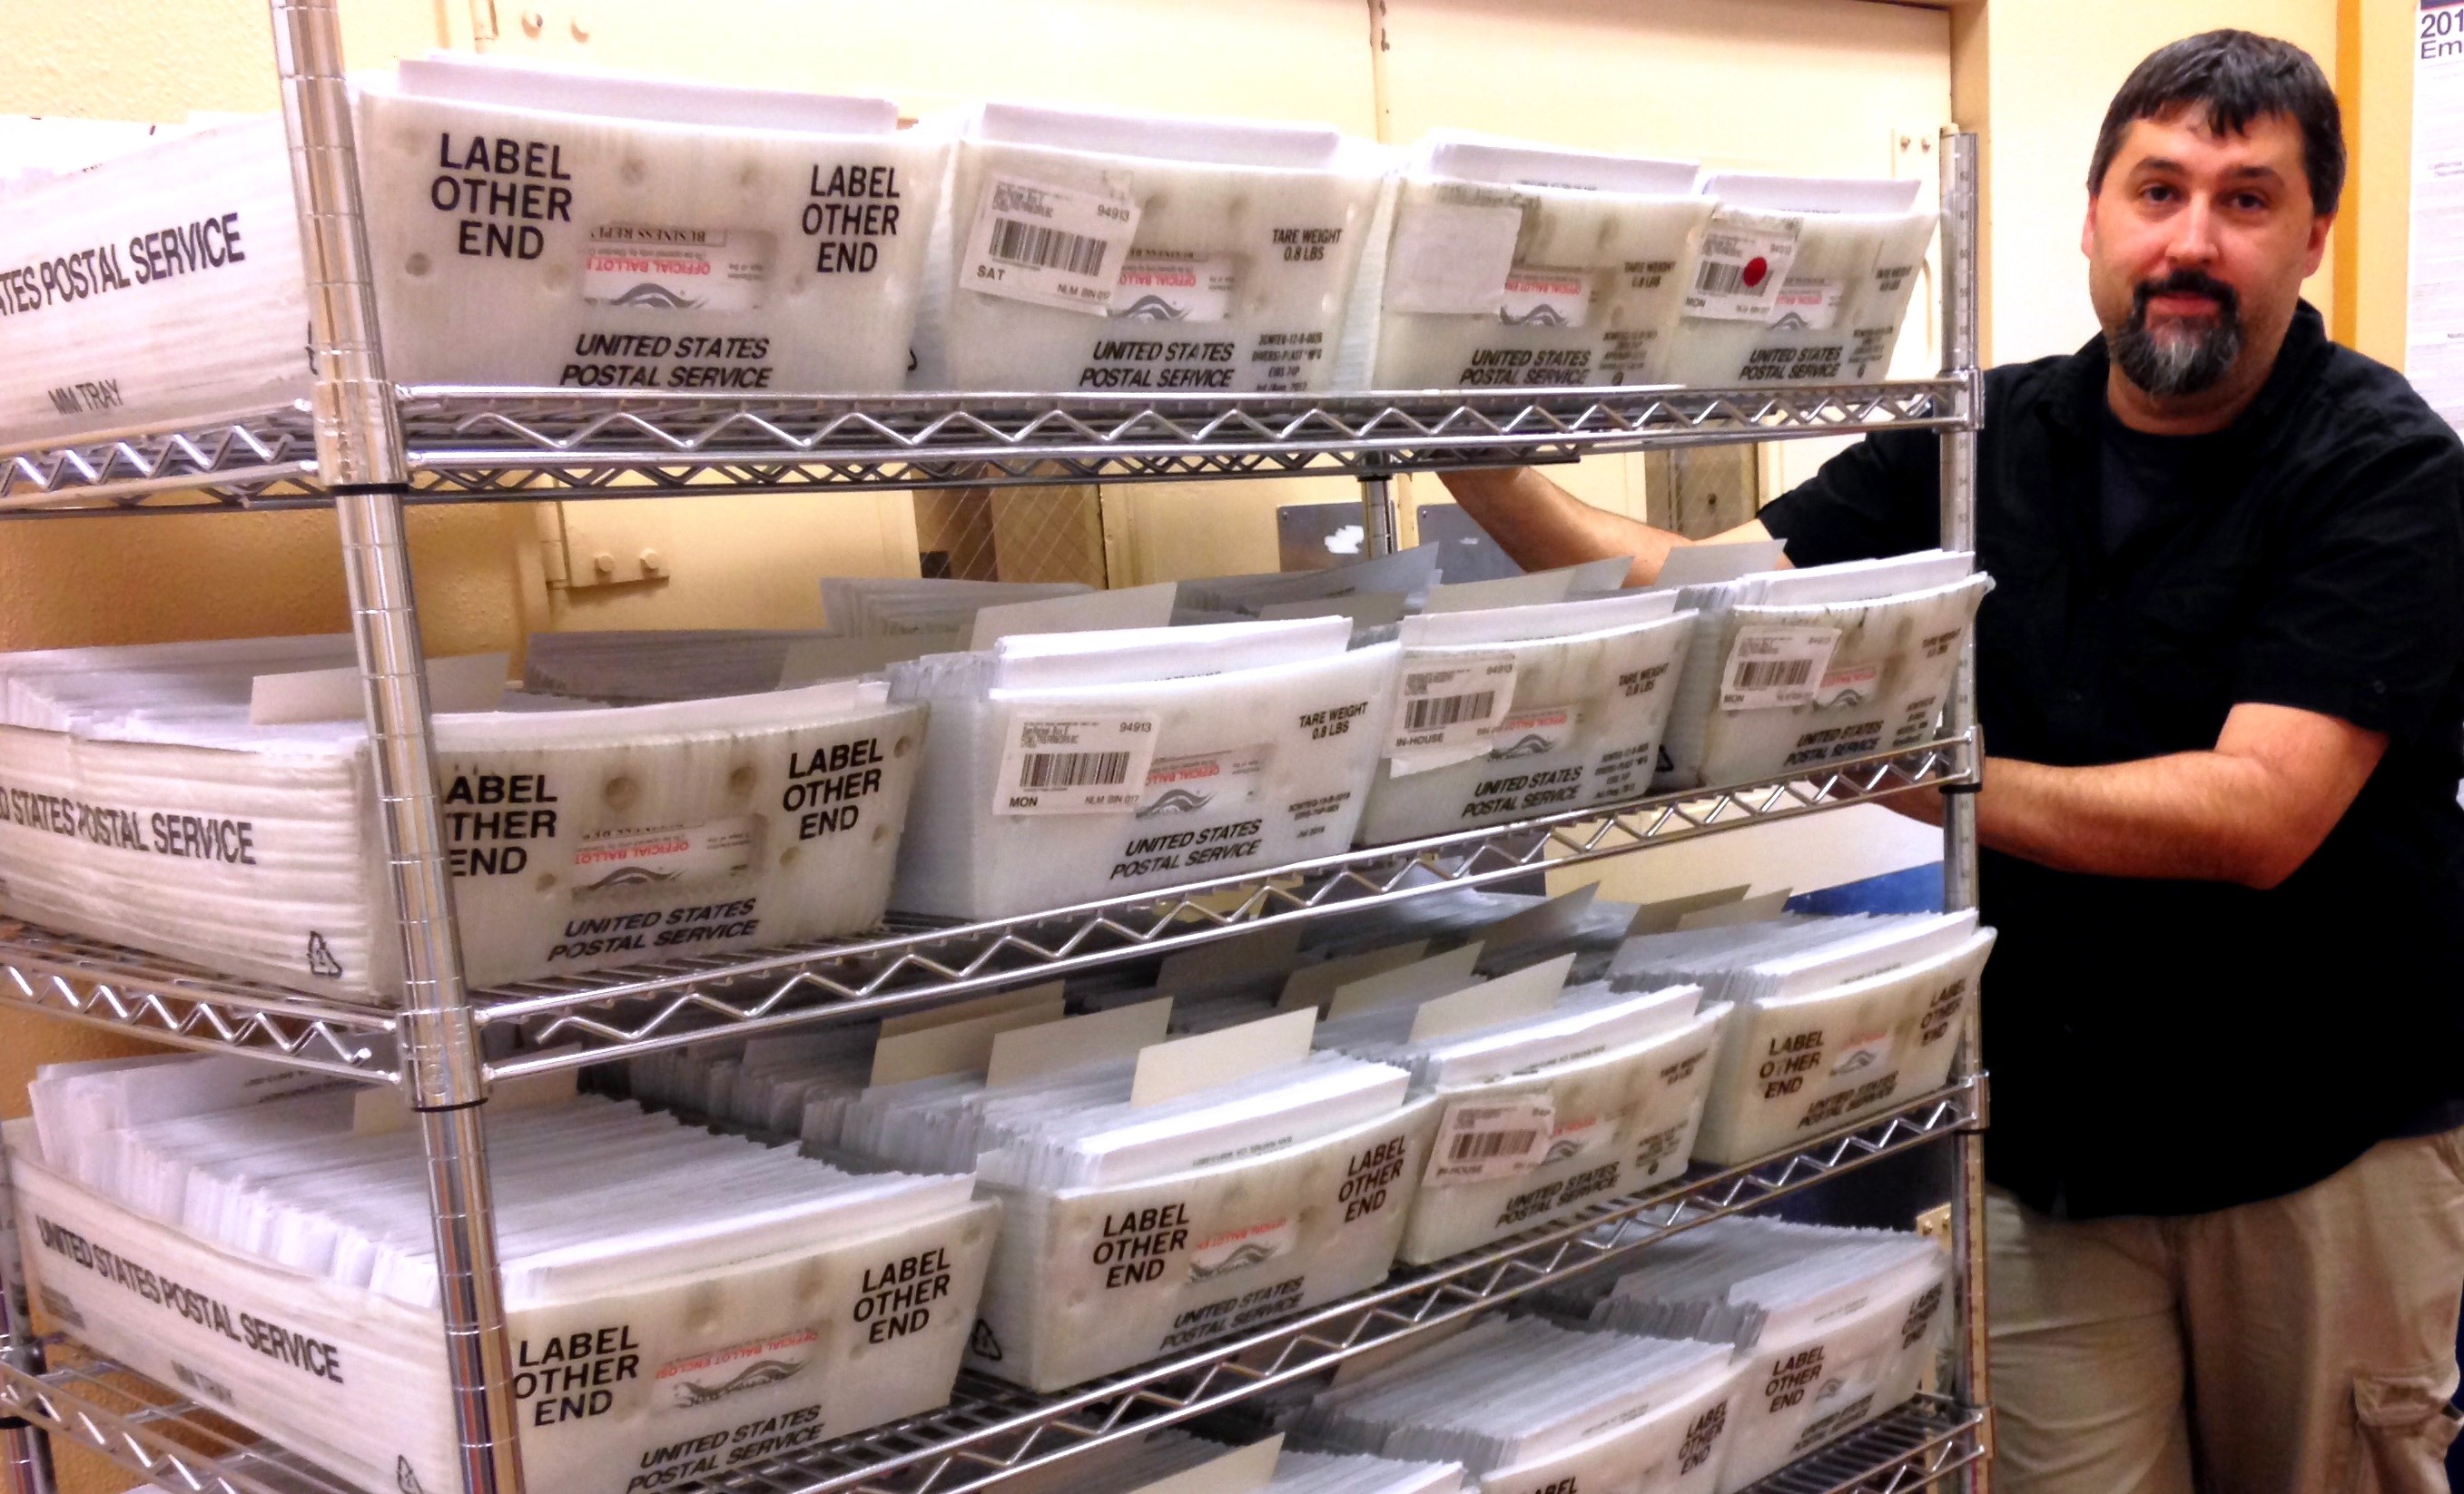 A male elections worker holds a mobile rack that holds thousands of ballot envelopes.